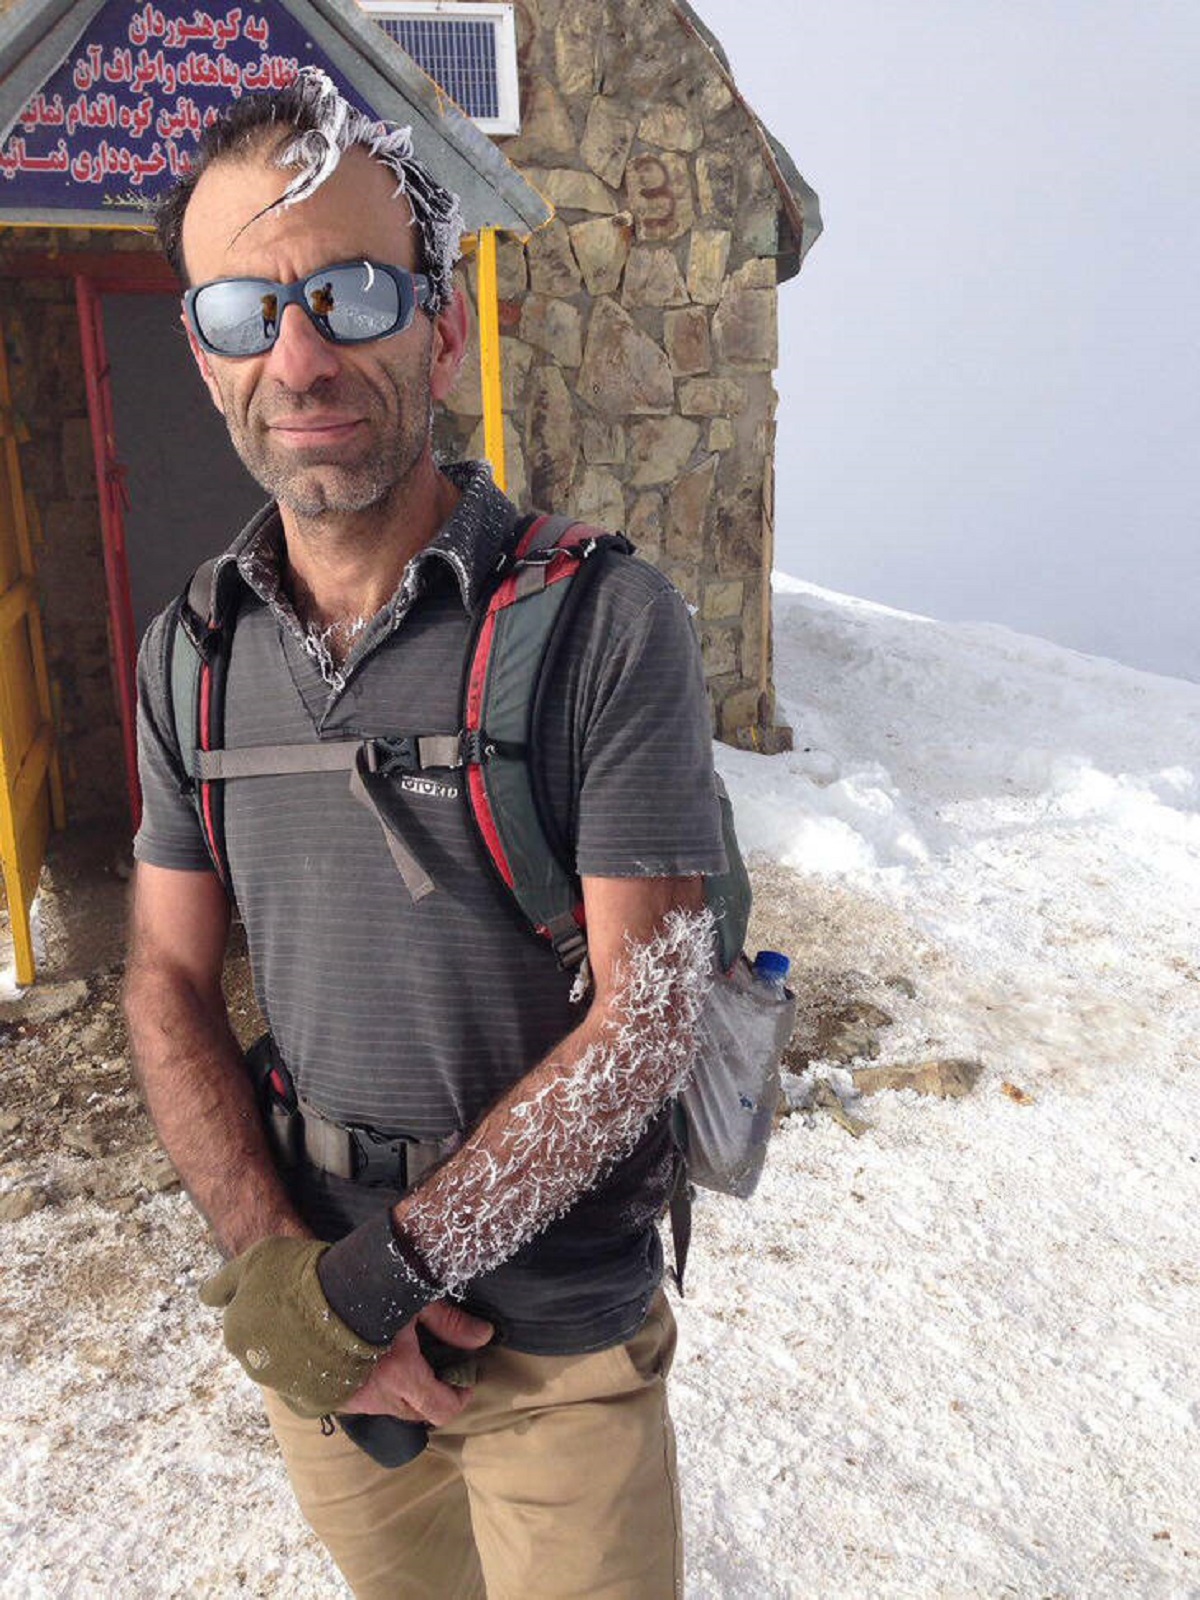 “My dad’s hair froze after hiking up a mountain in his t-shirt.”